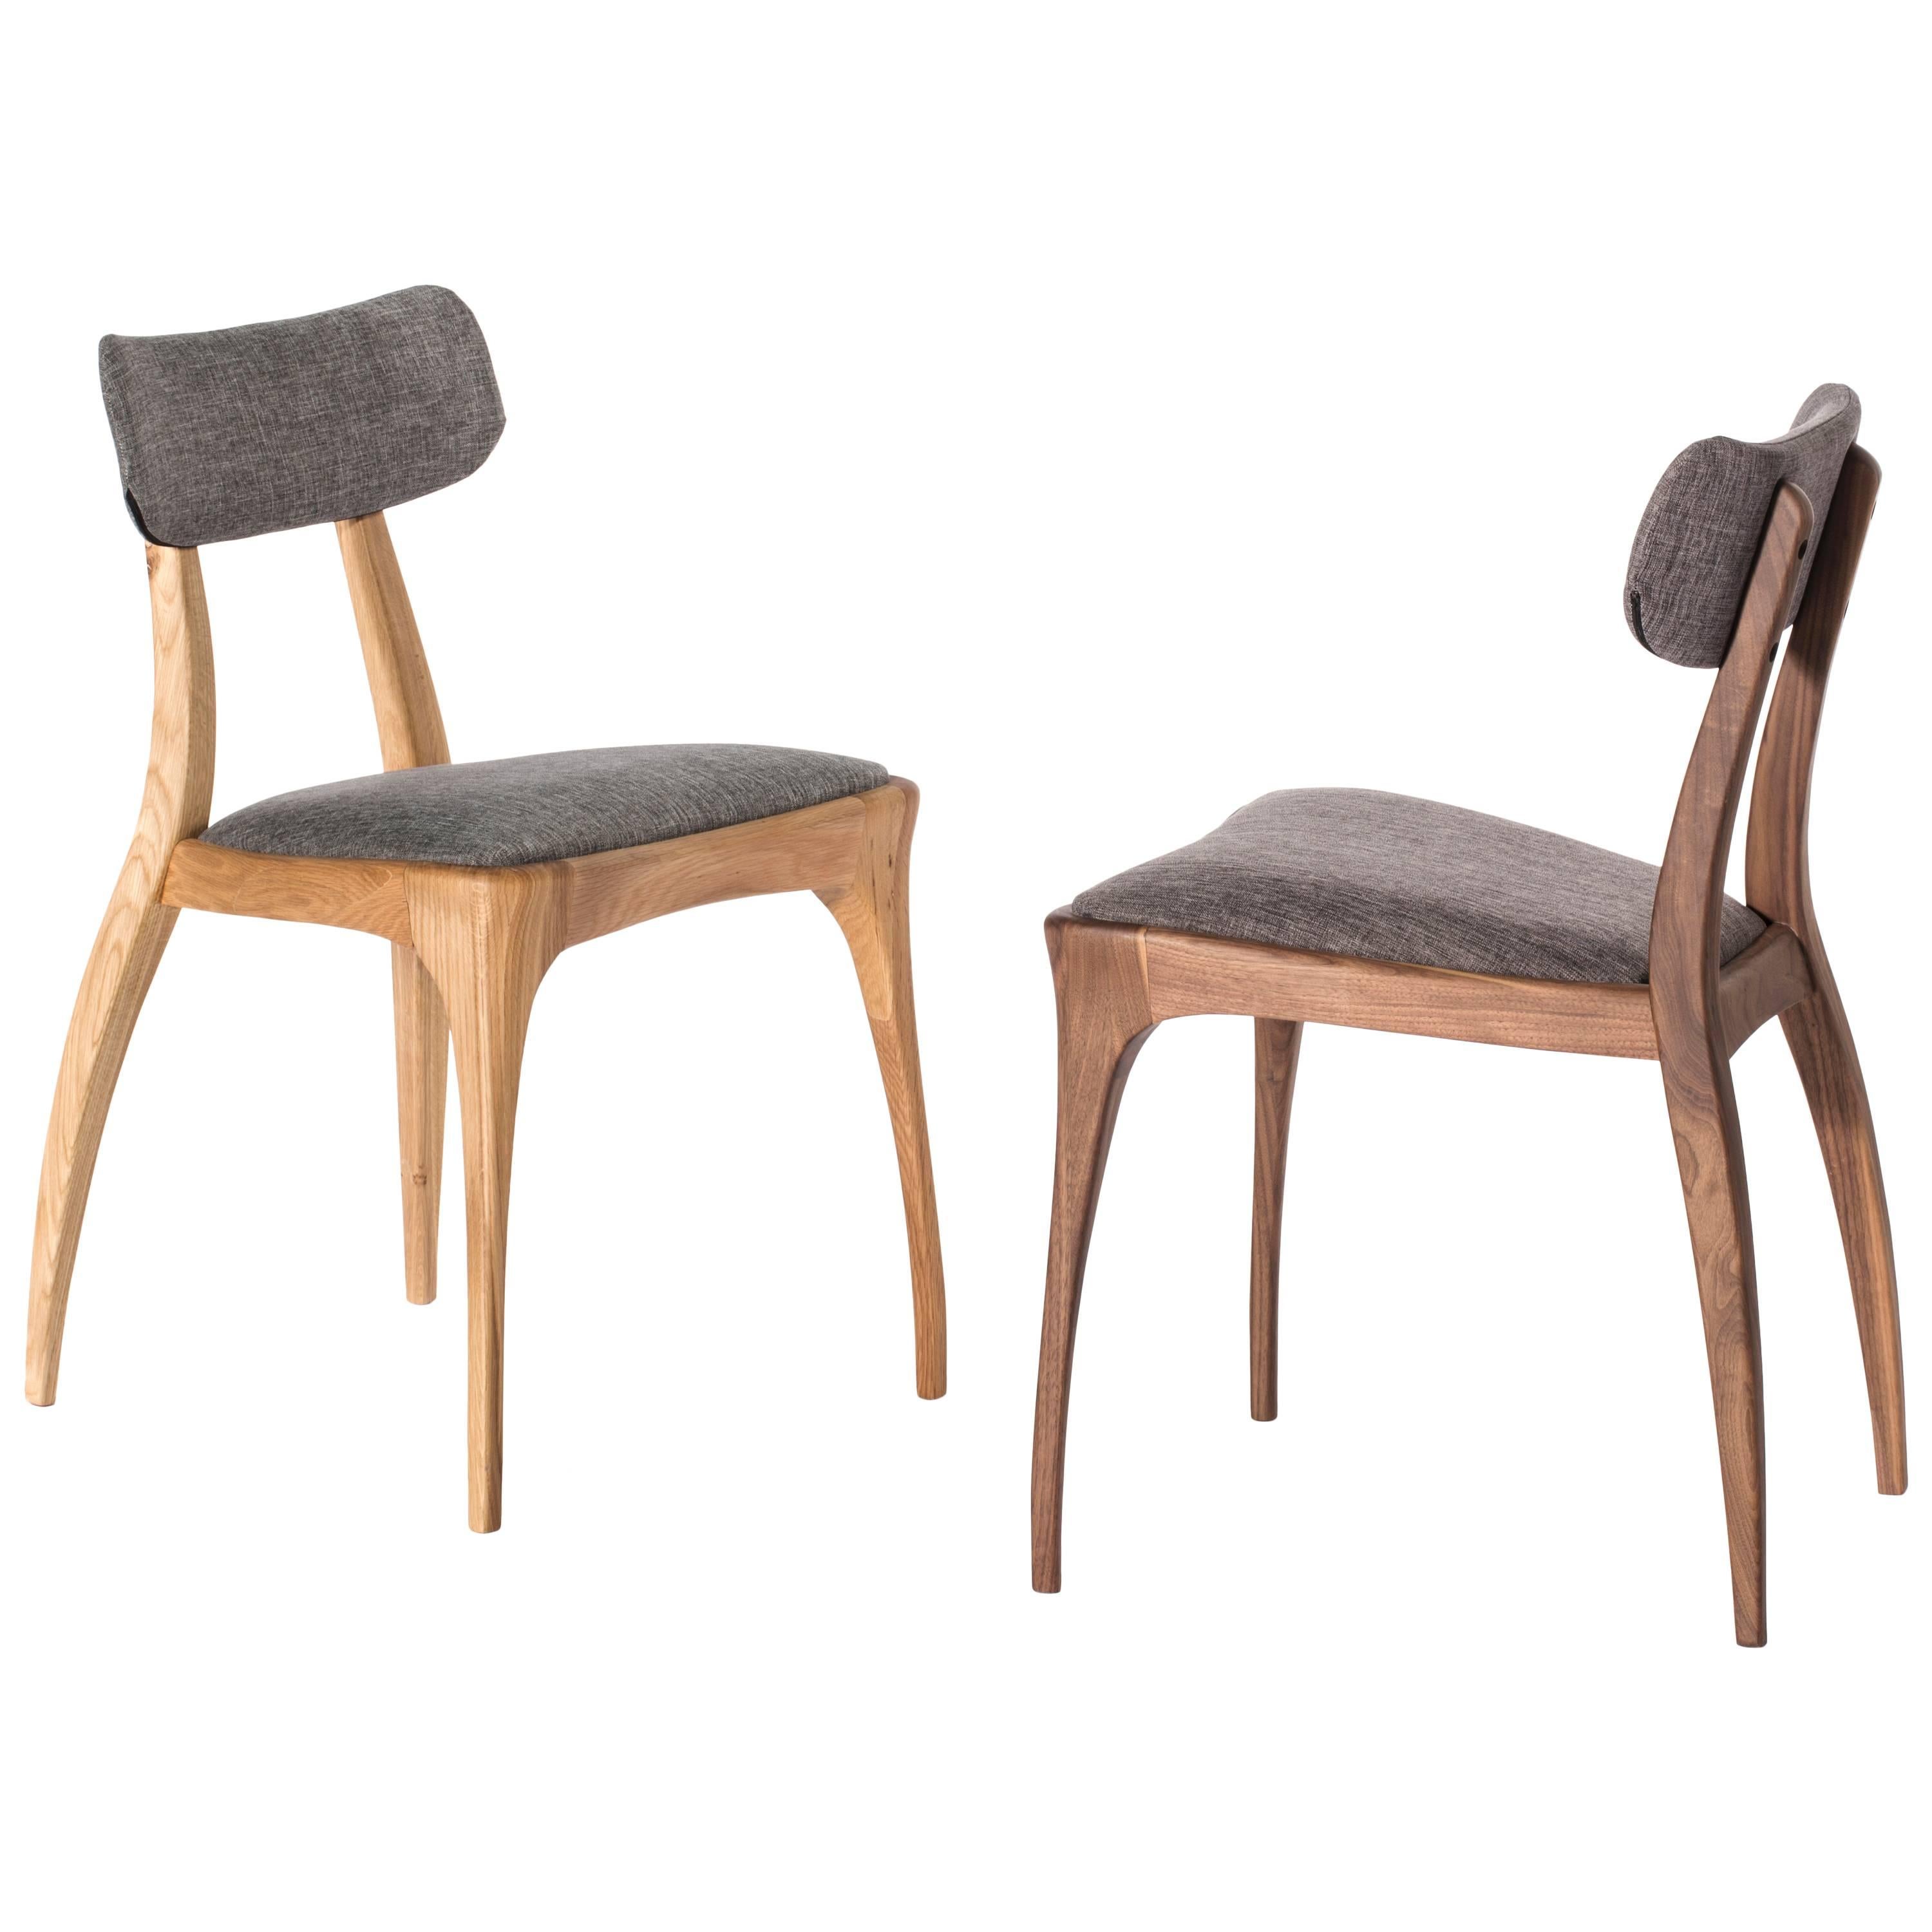 Pair of European Modern Walnut or Oak Upholstered Dining Chairs